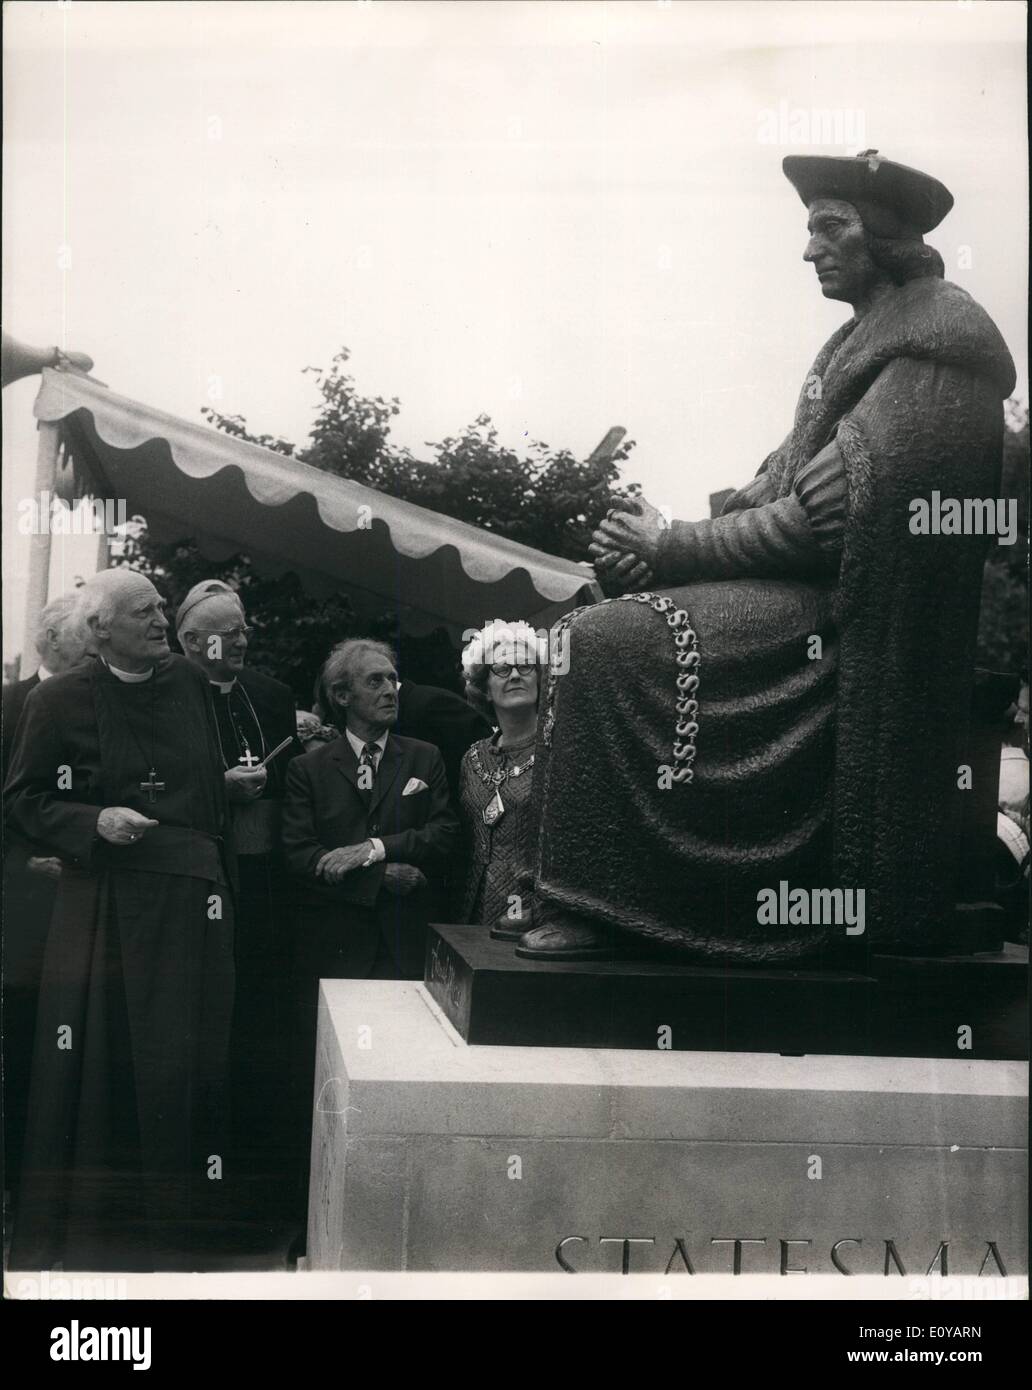 Jul. 07, 1969 - Dr. Horace King unveils statue to Thomas More in Chelsea Old Church: Dr. Horace King, Speaker of the House of Commons, today unveiled a statue to St. Thomas More, in Chelsea Old Church. Dr. Michael Ramsey, the Archbishop of Canterbury, was present at the ceremony, together with Cardinal Heeman. Photo shows Looking up at the statue of St. Thomas More after the unveiling ceremony are (L to R) Dr. Ramsay, Cardinal Heeman, Dr. Cubitt Bevis, the sculpter. Stock Photo